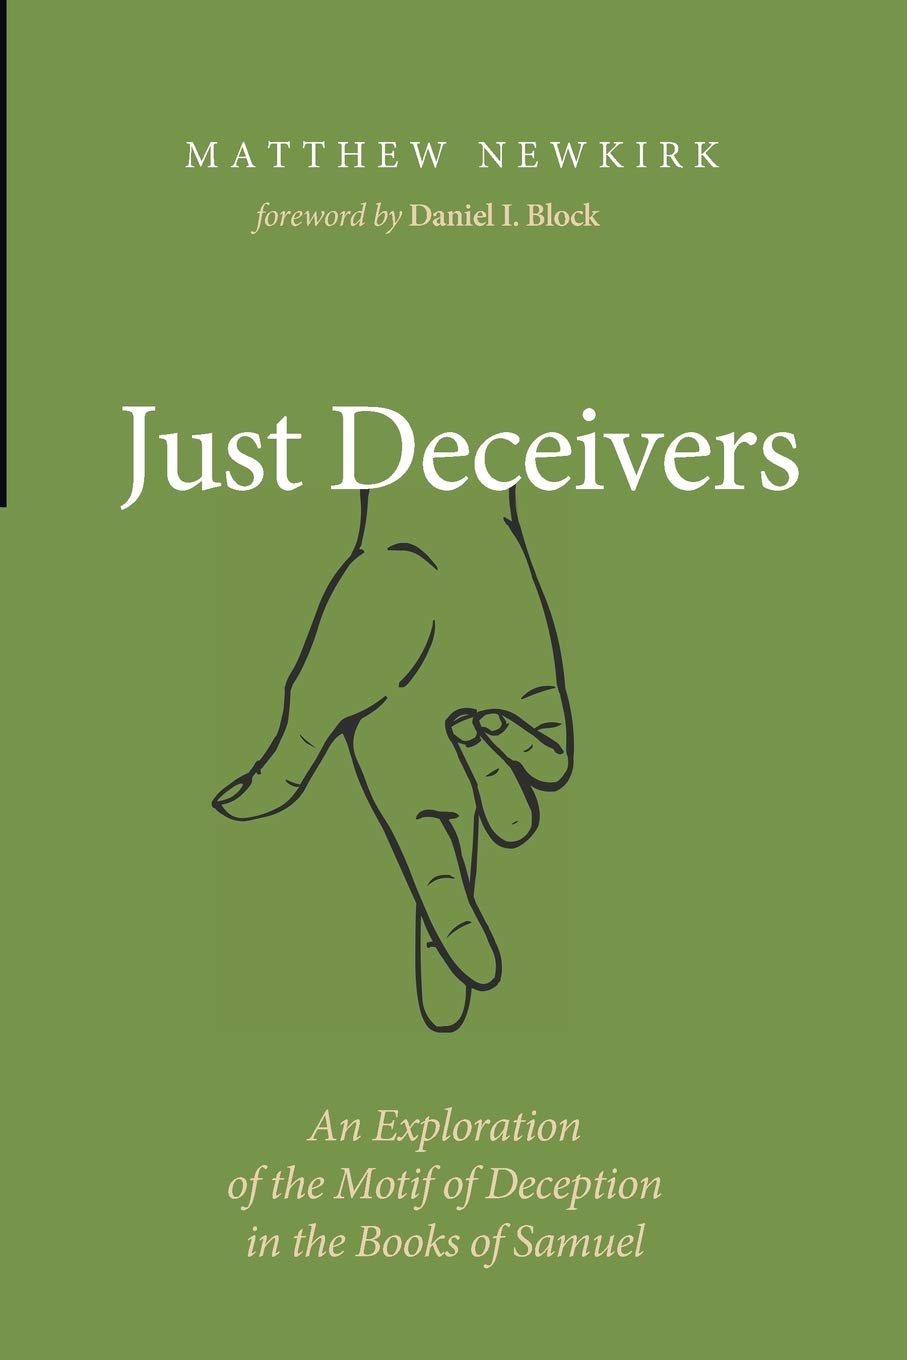 Just Deceivers: An Exploration of the Motif of Deception in the Books of Samuel